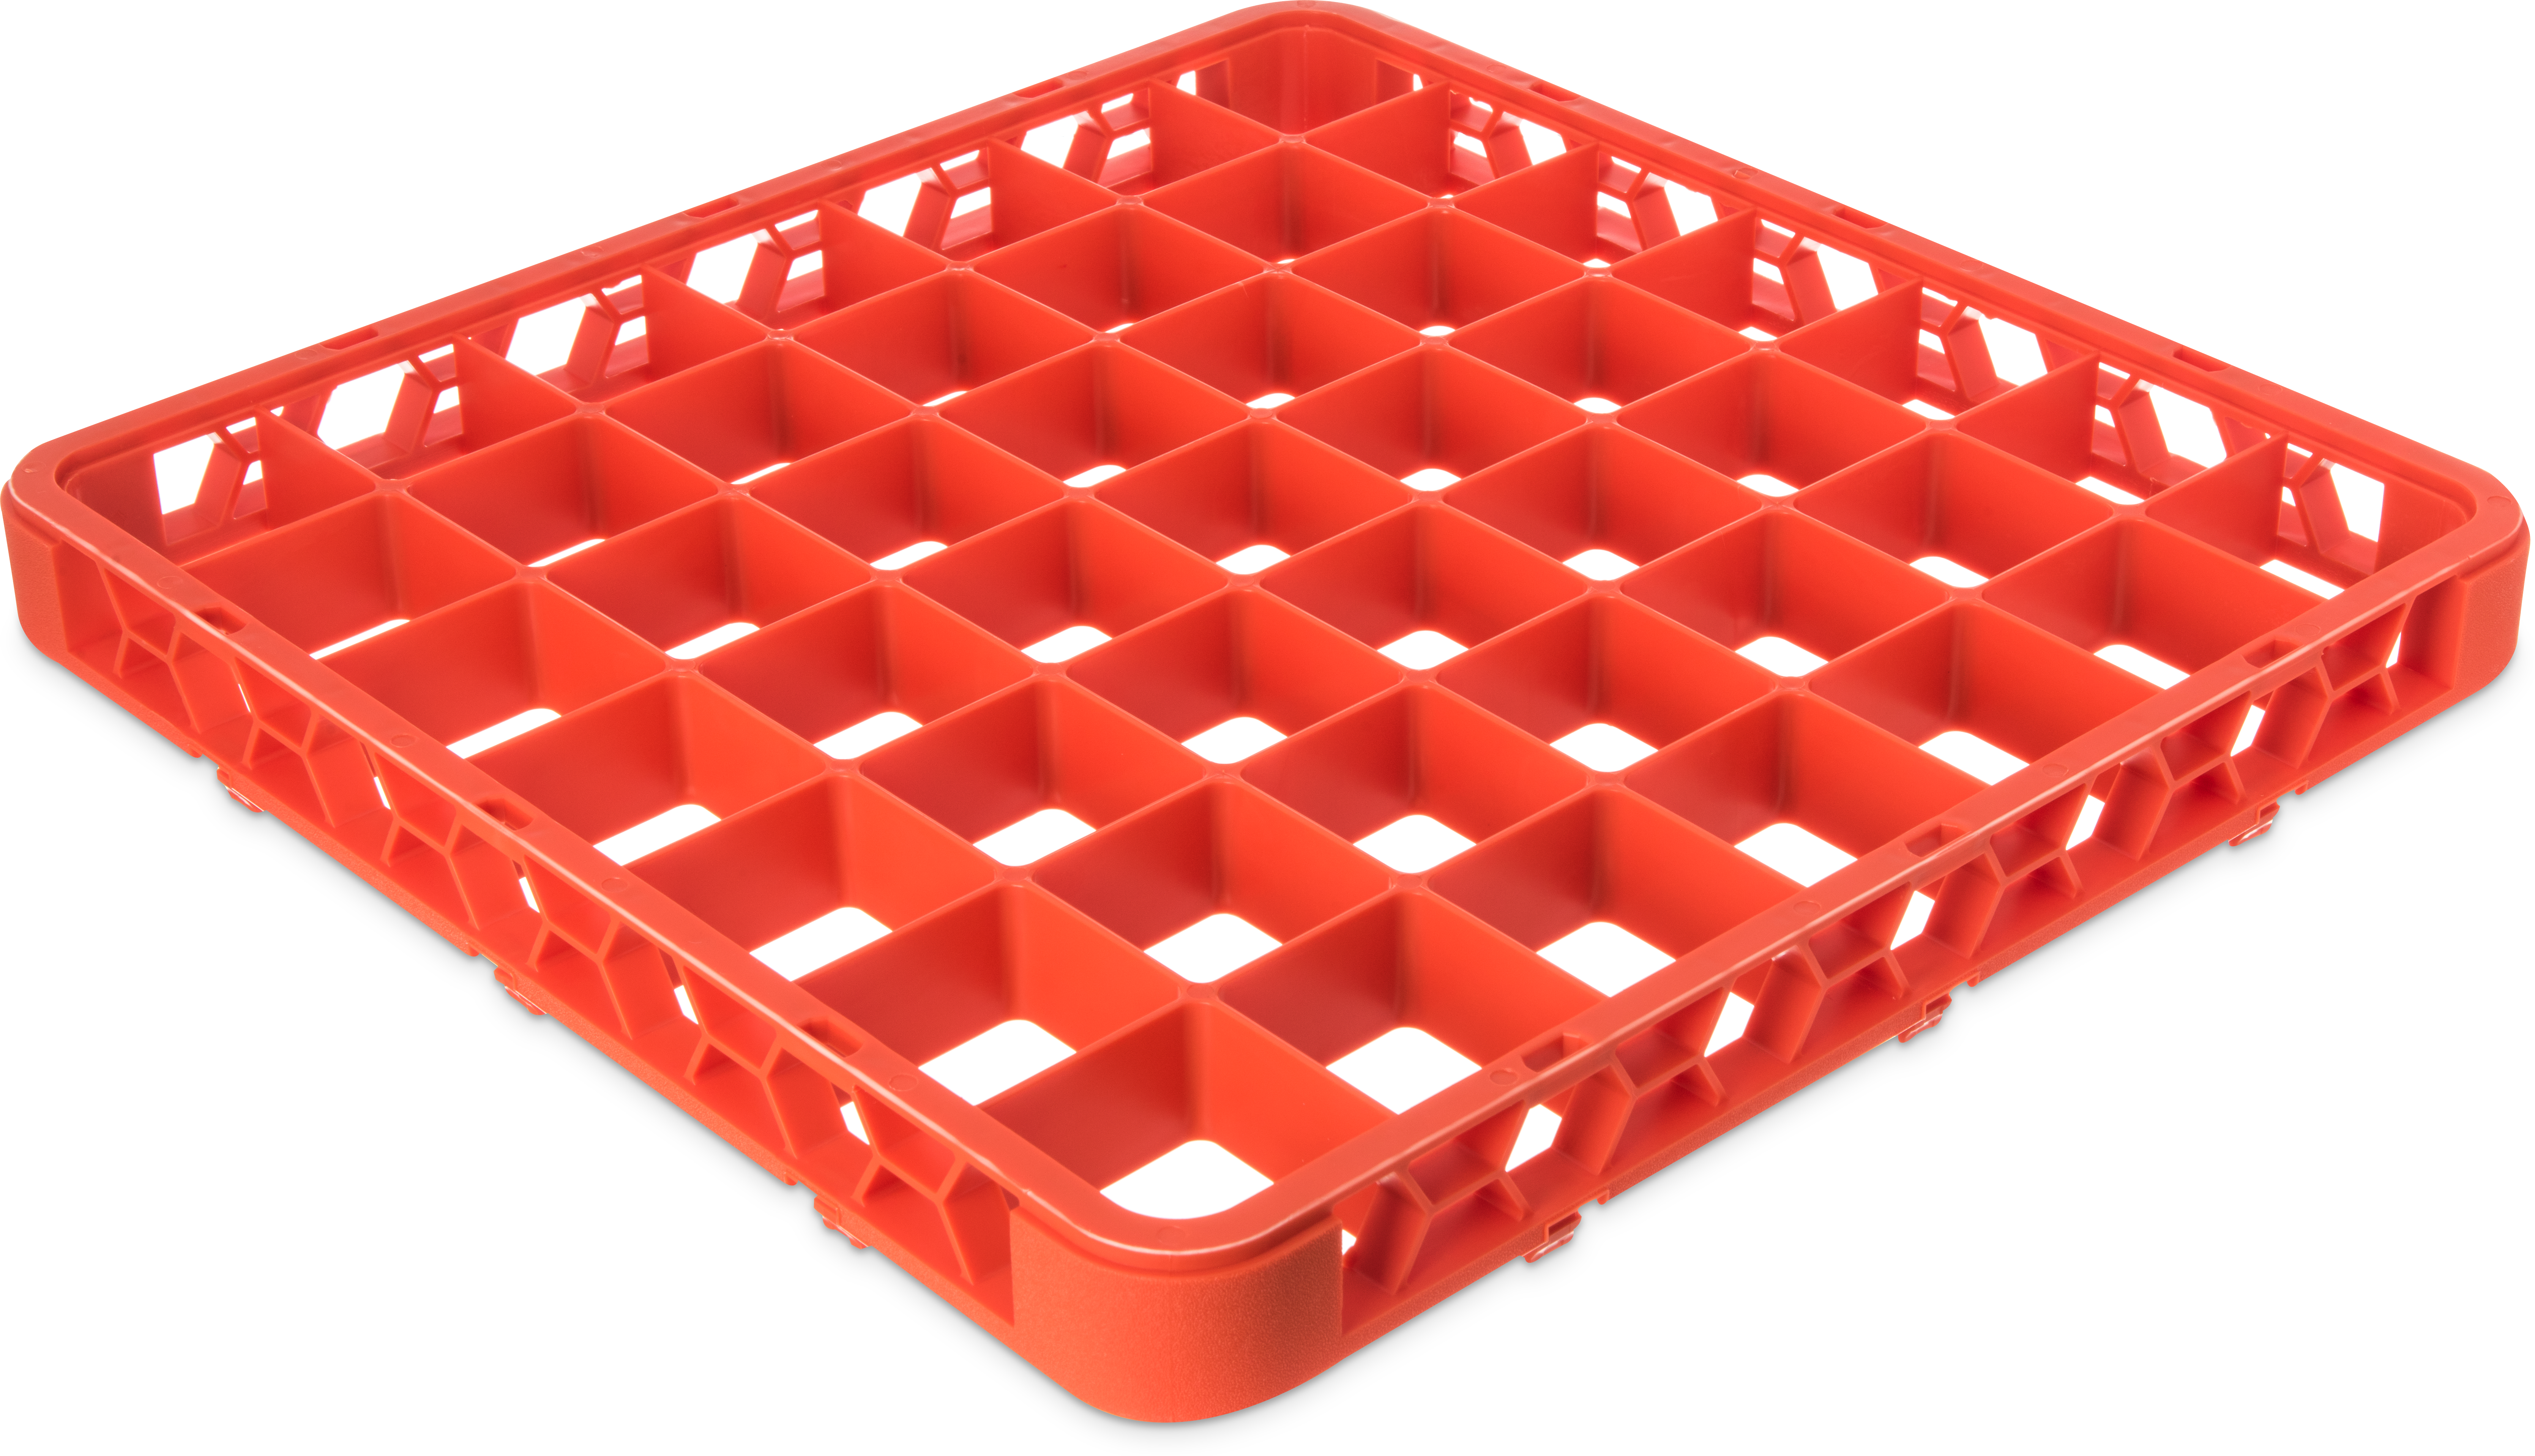 OptiClean 49 Compartment Divided Glass Rack Extender 1.78 - Orange